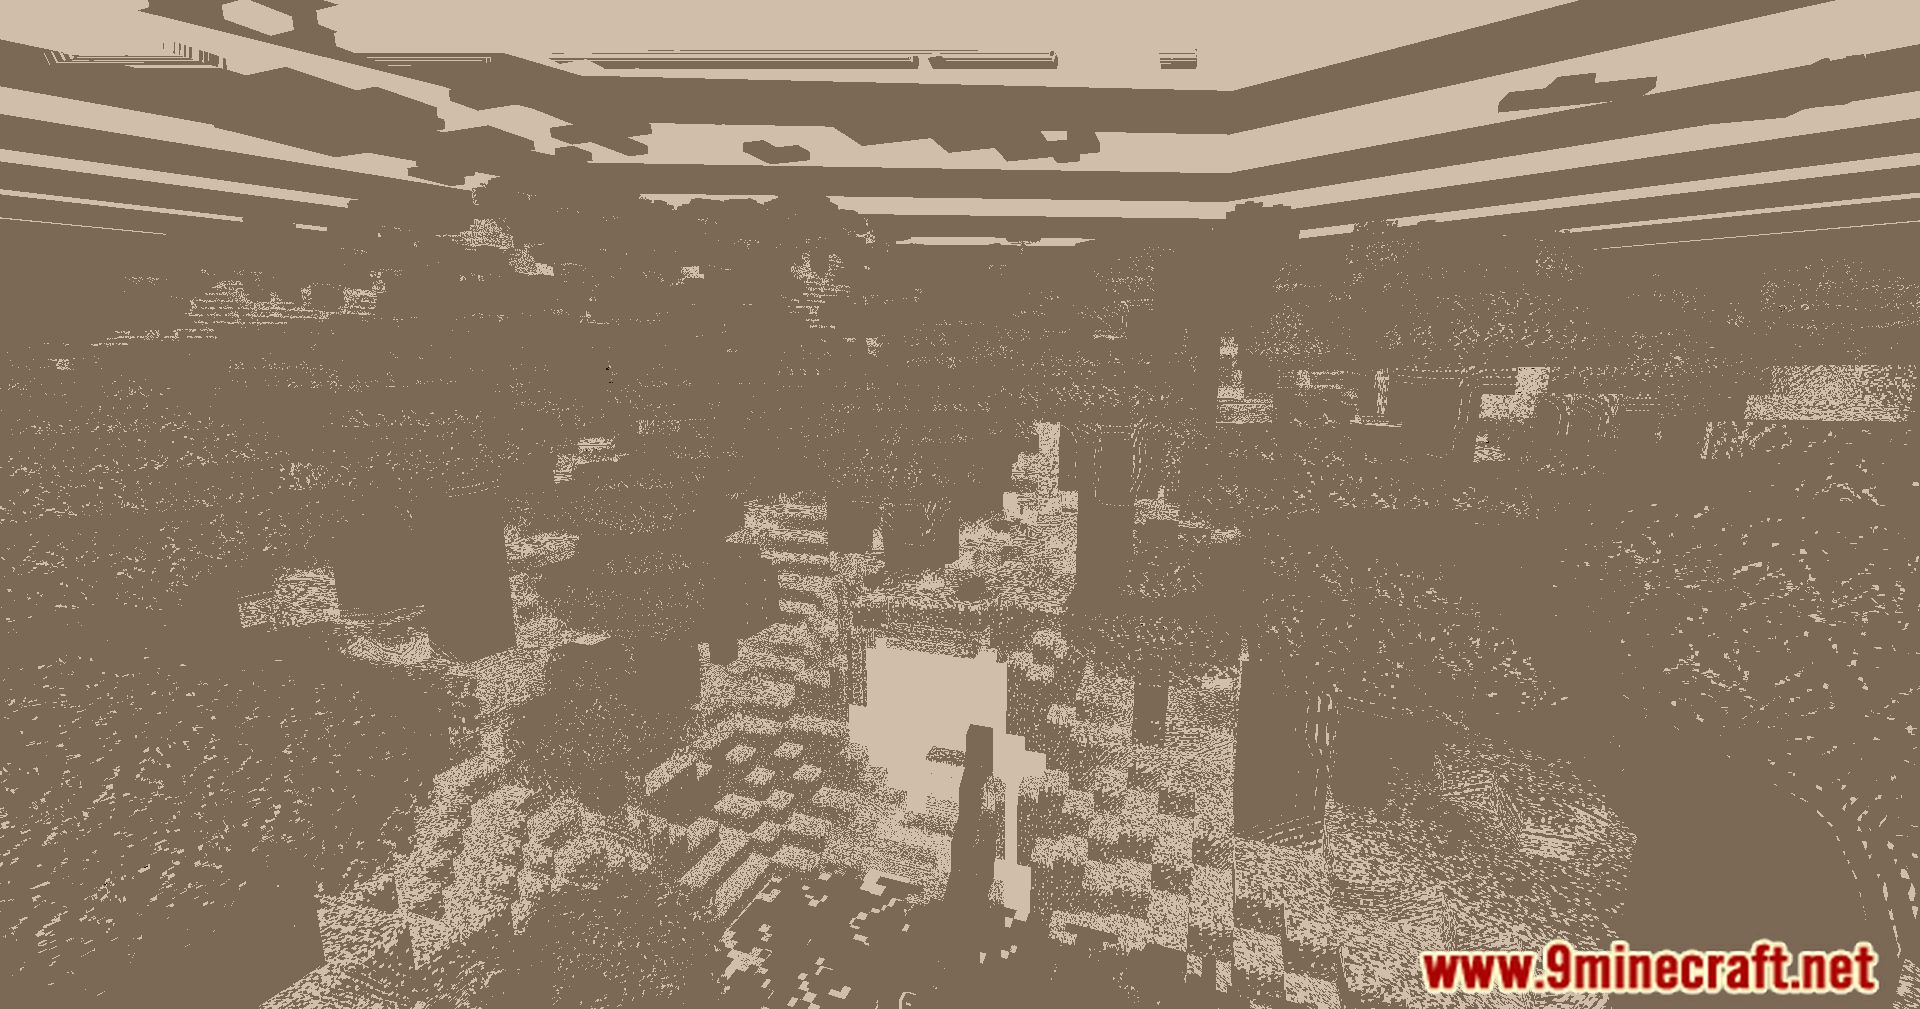 LBD Shaders (1.20.4, 1.19.4) - Your Gateway To Learning OptiFine GLSL 7